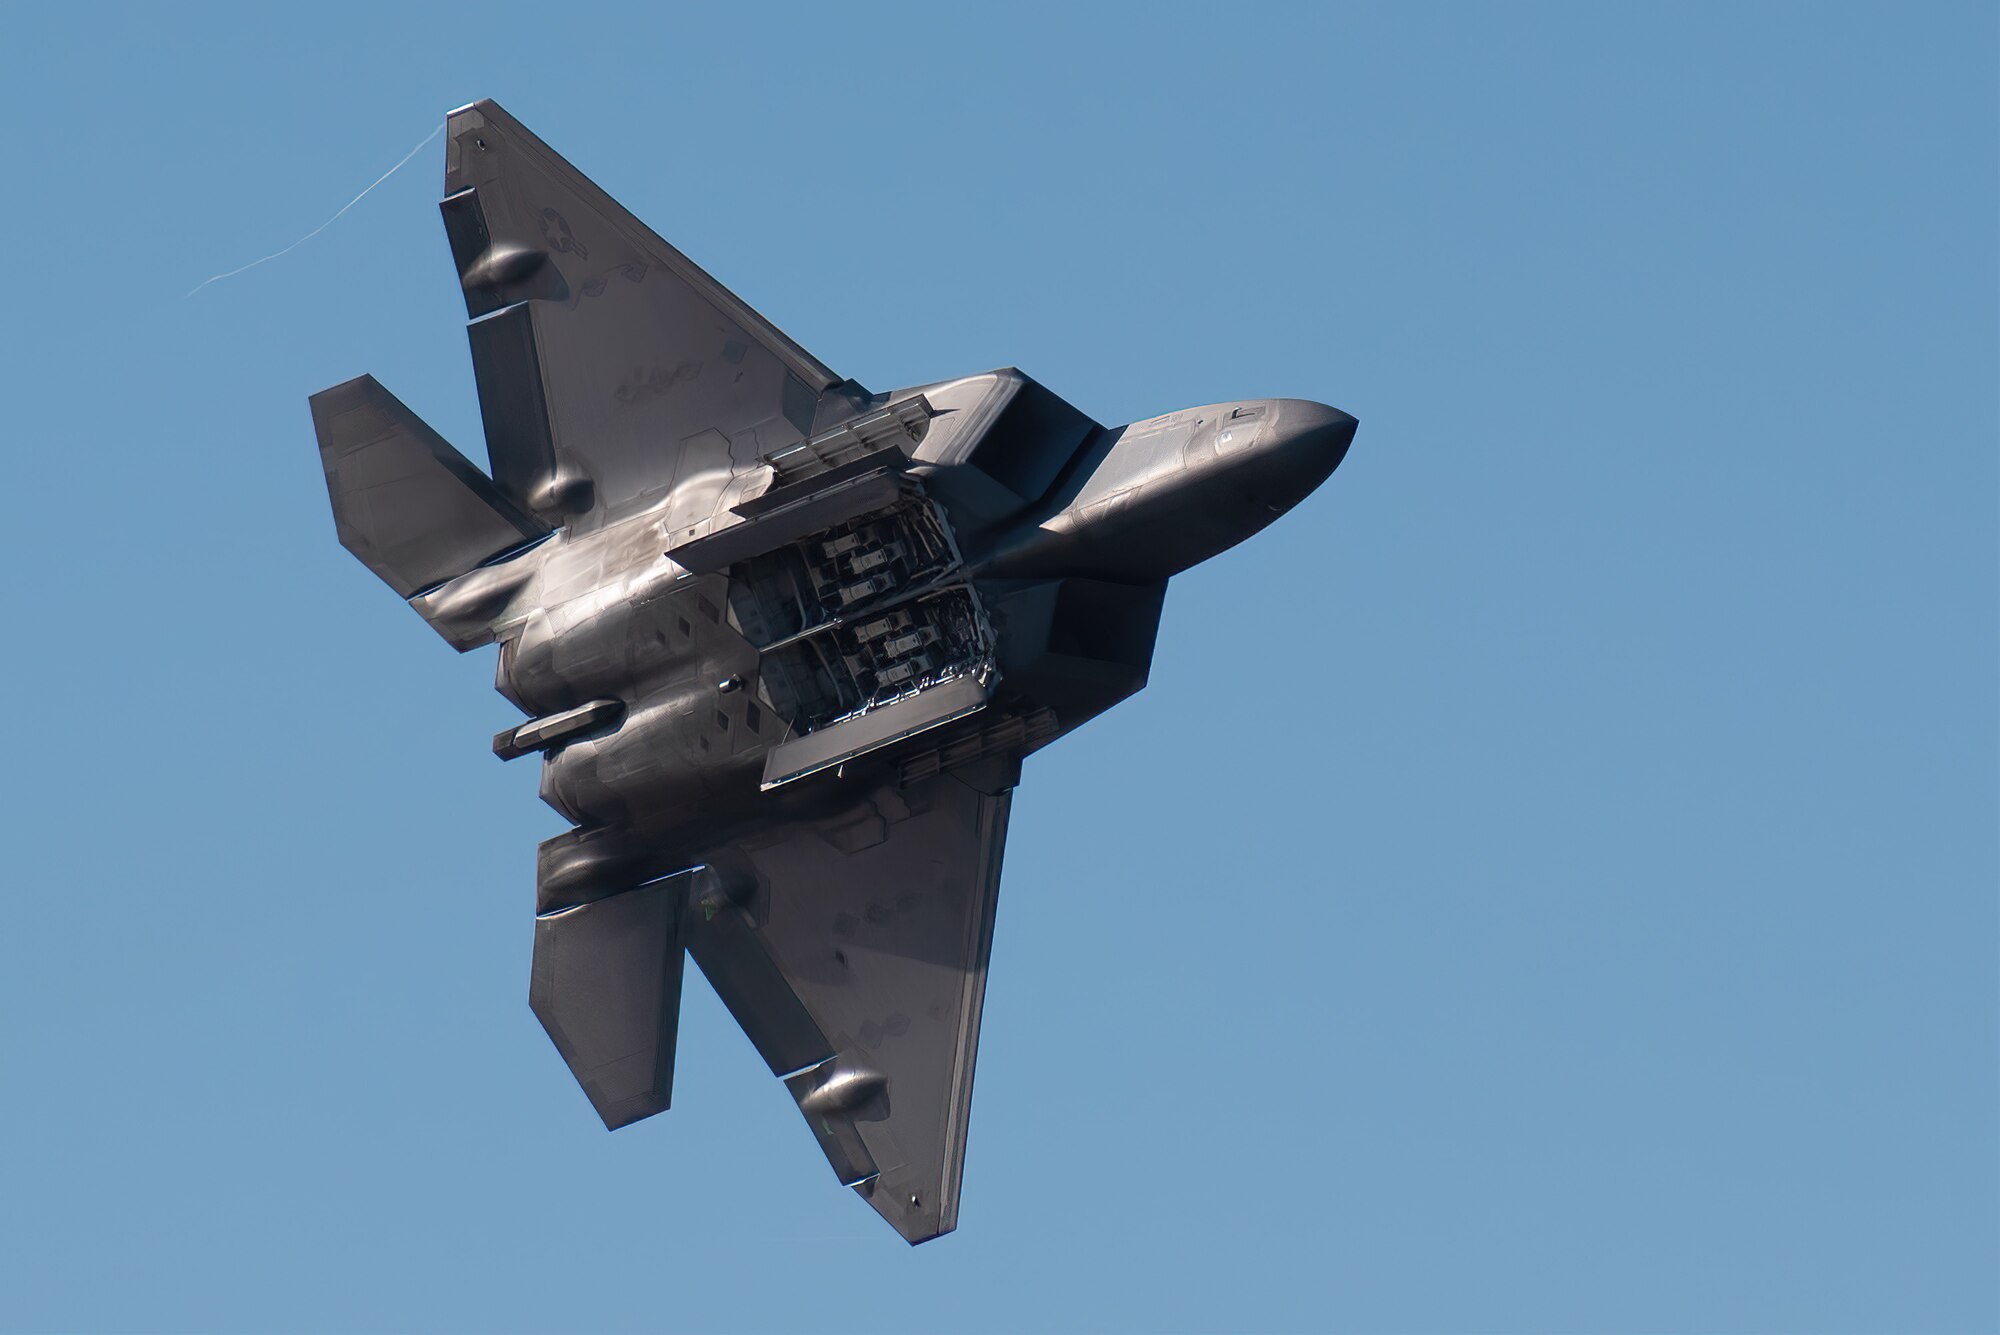 The U.S. Air Force F-22 Raptor Demo Team from the 1st Fighter Wing at Langley Air Force Base, Va., performs an aerial demonstration over the Ohio River in downtown Louisville, Ky., April 23, 2022 as part of the Thunder Over Louisville air show. This year’s event celebrated the 75th anniversary of the United States Air Force. (U.S. Air National Guard photo by Dale Greer)